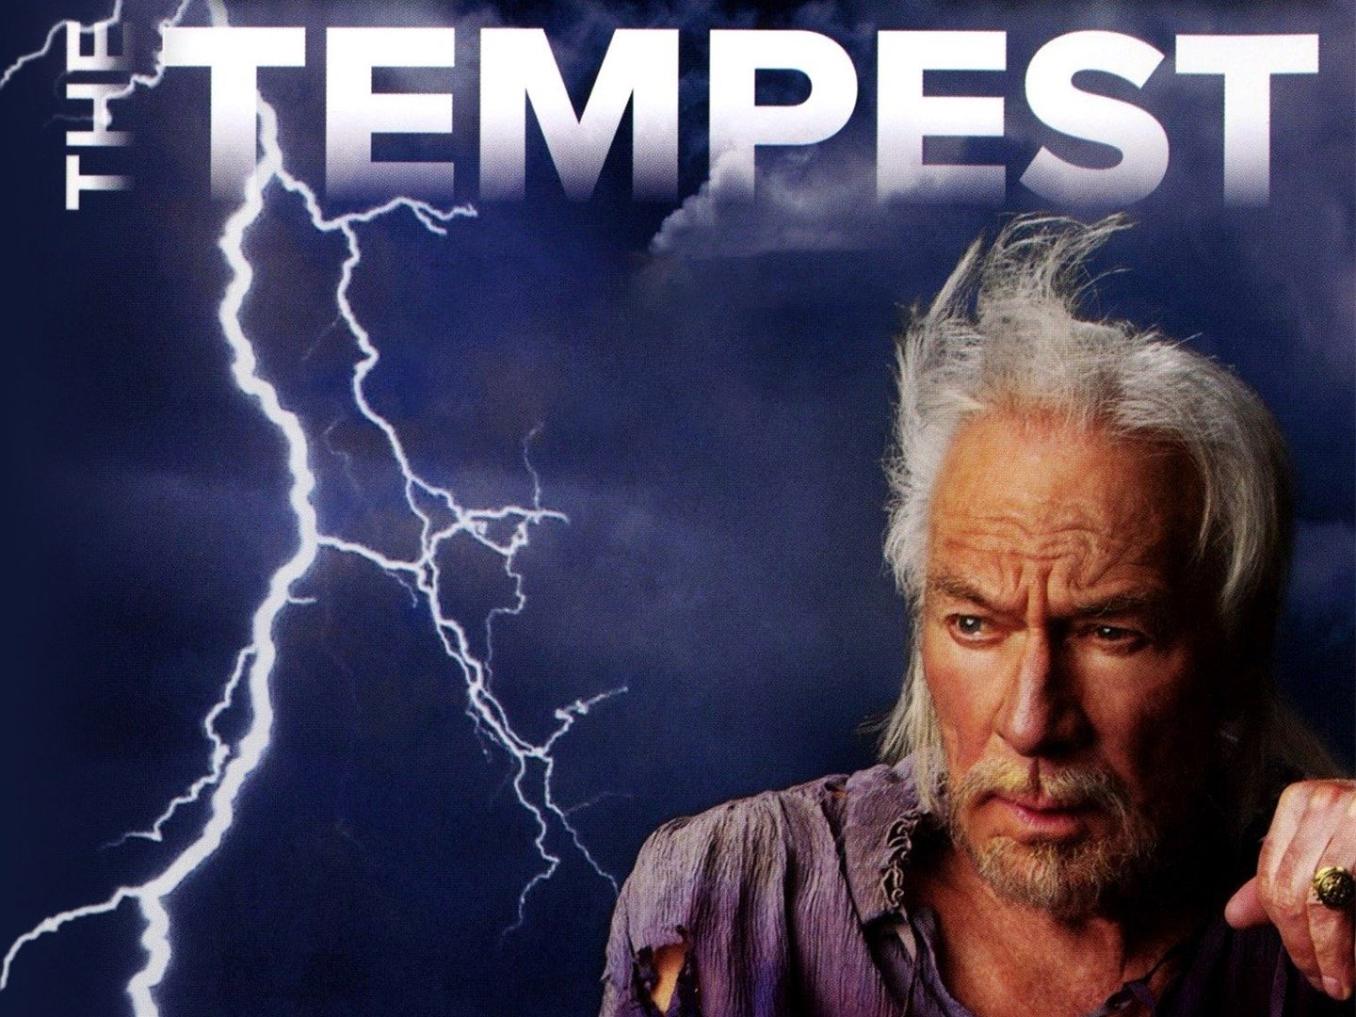 How Can The Tempest's Themes Of Betrayal And Revenge Impact Business Decision-Making?